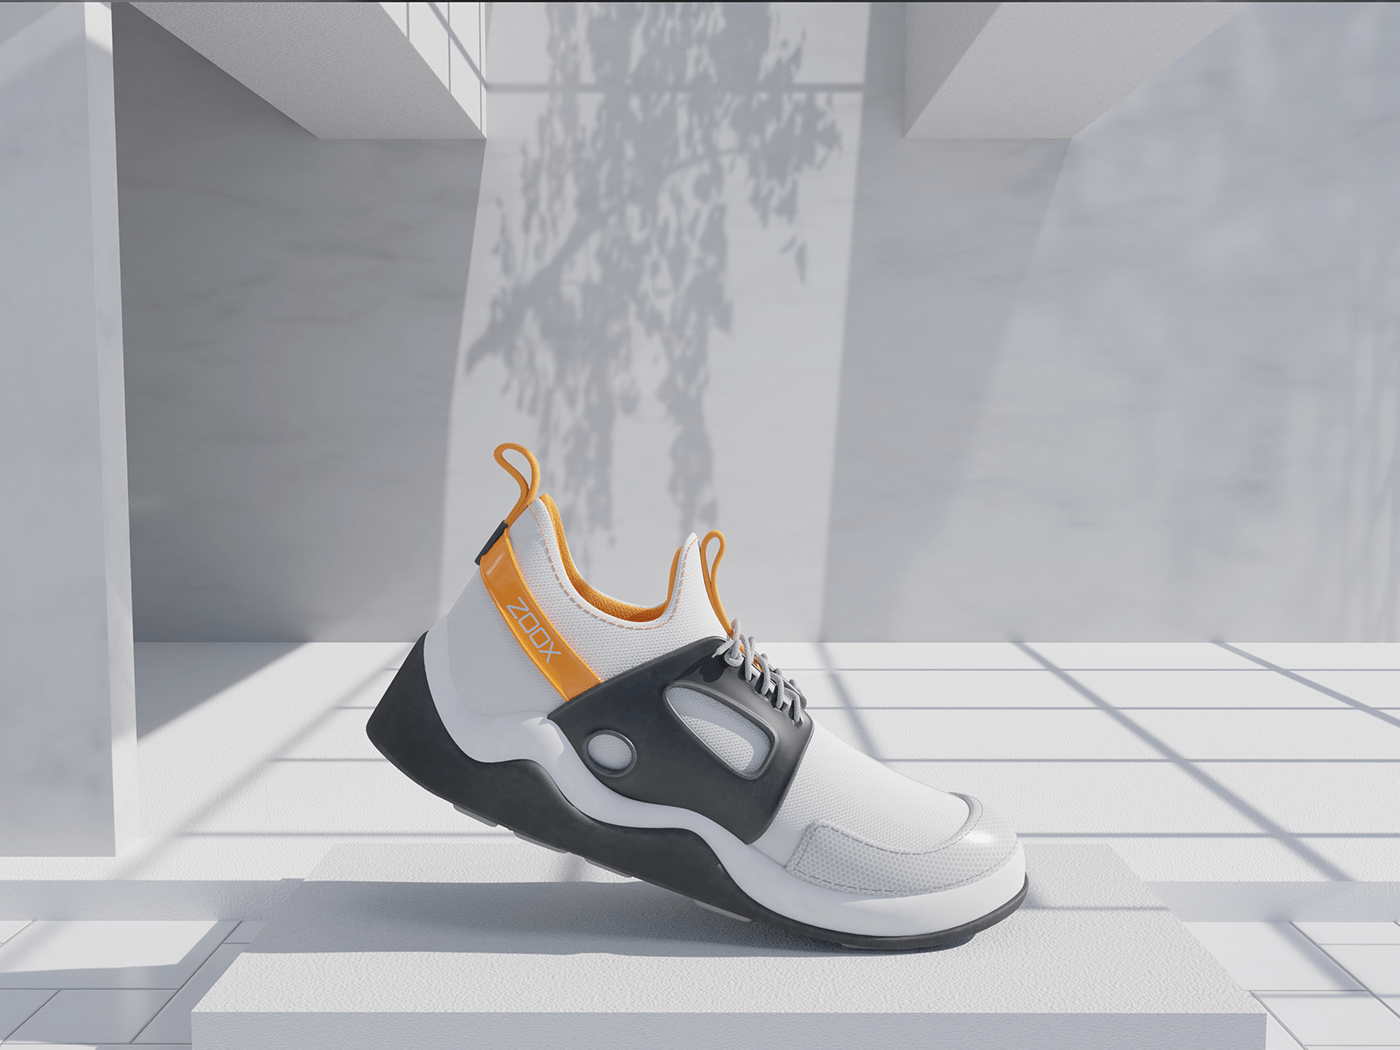 3D 3d animation 3d modeling Advertising  animation  design Nike shoes shoes design sneakers